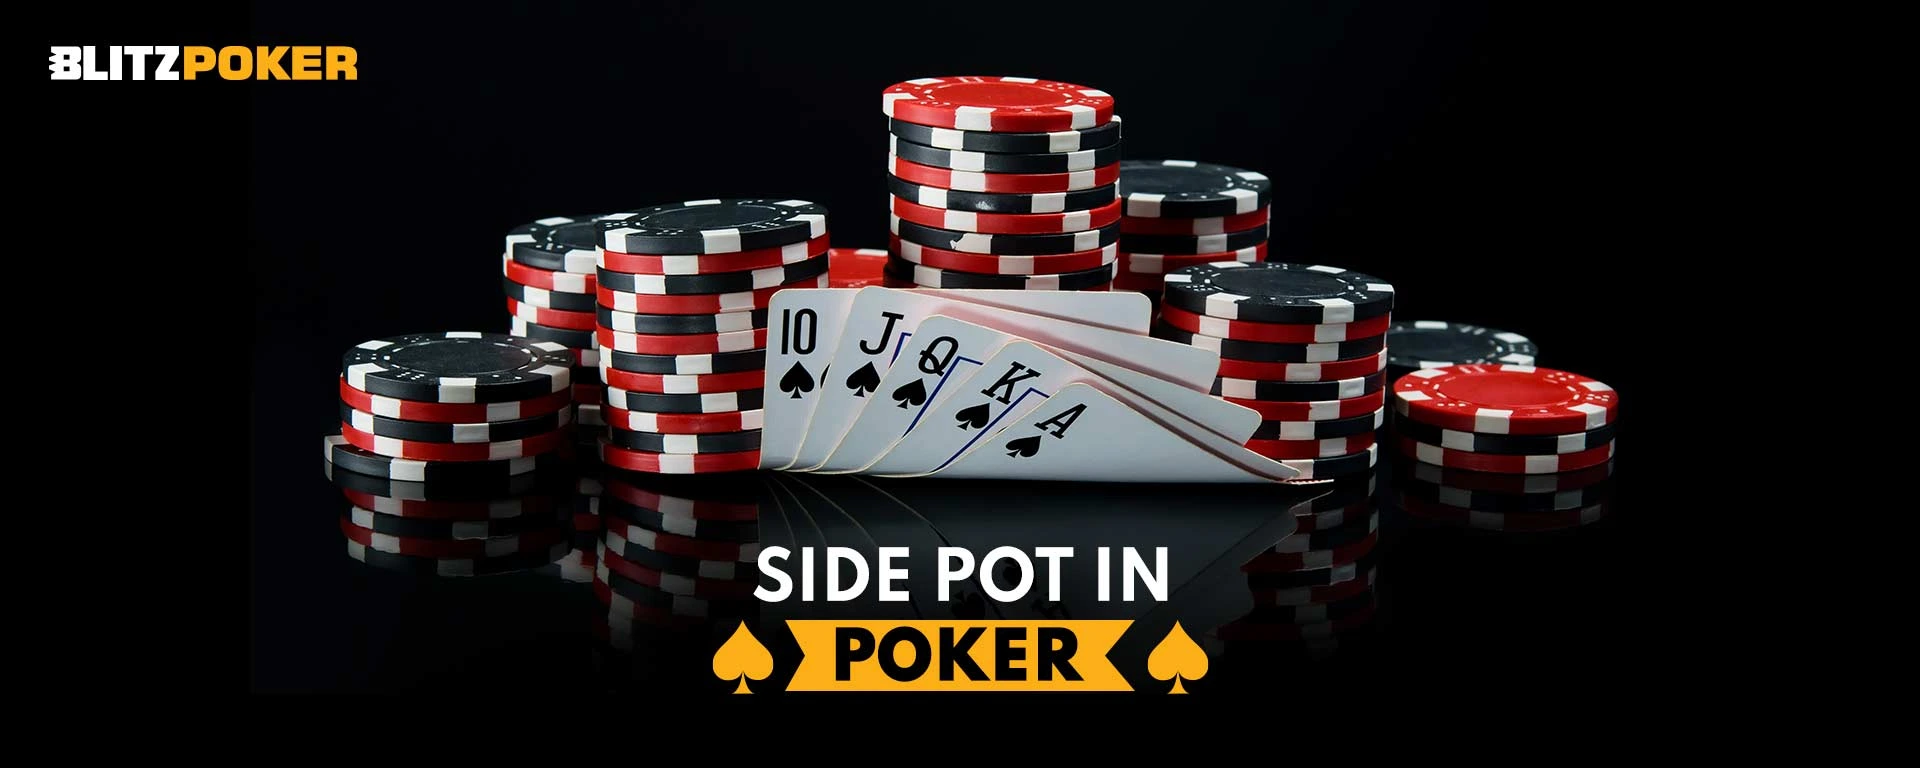 How Does a Side Pot Work in Poker